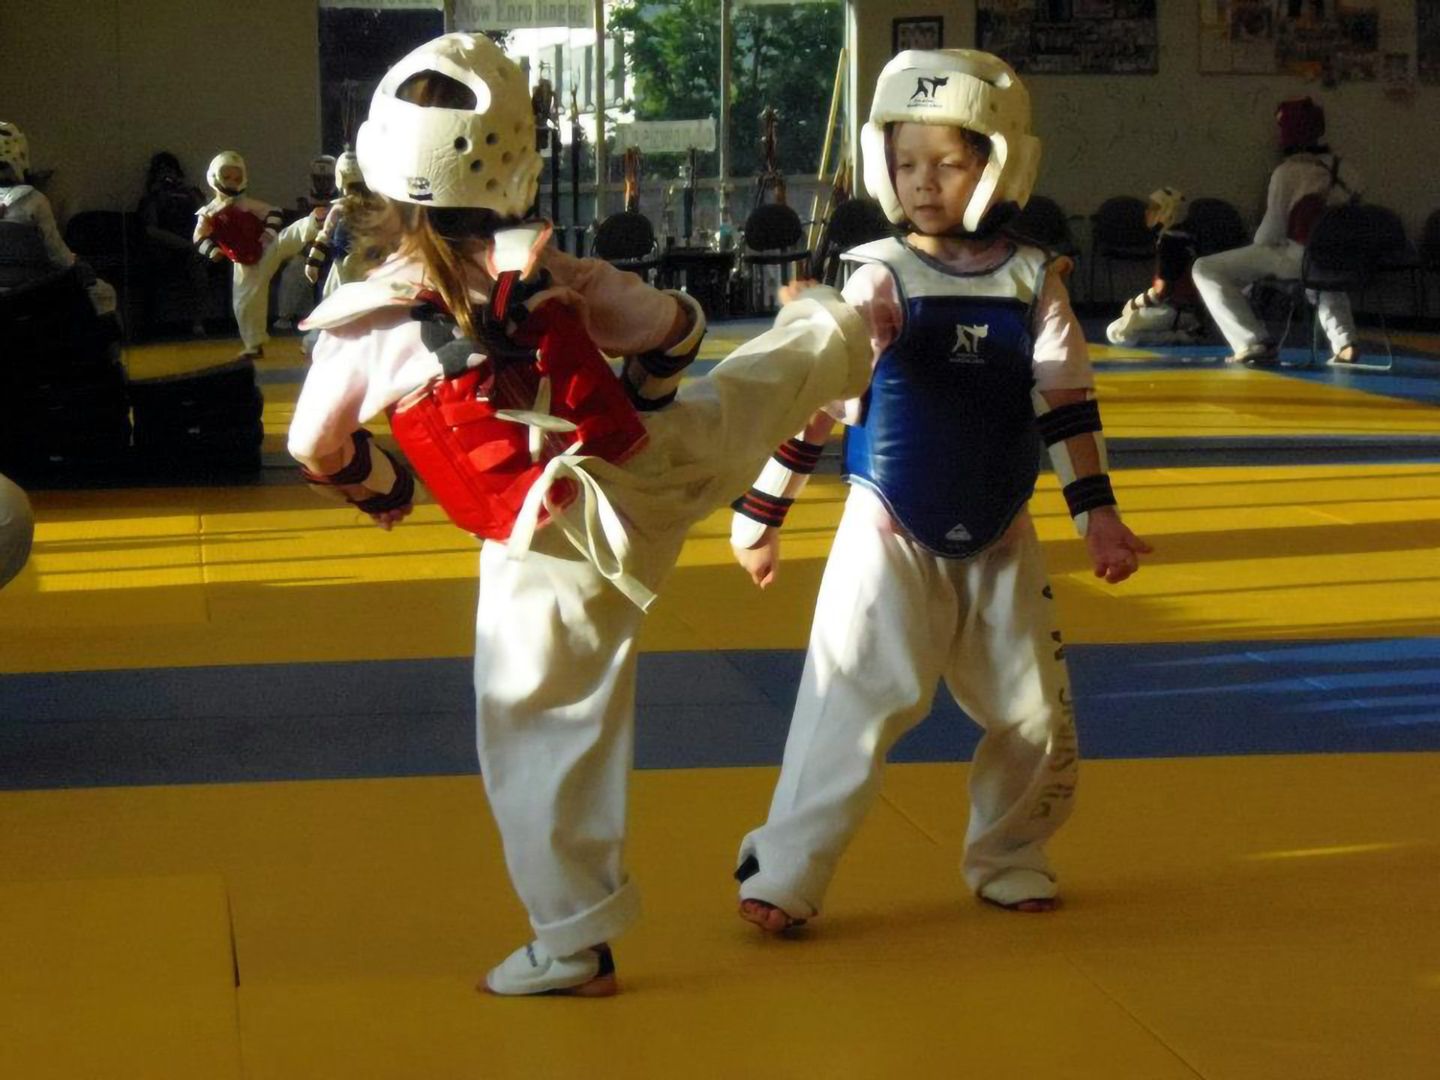 Image of child performing martial arts